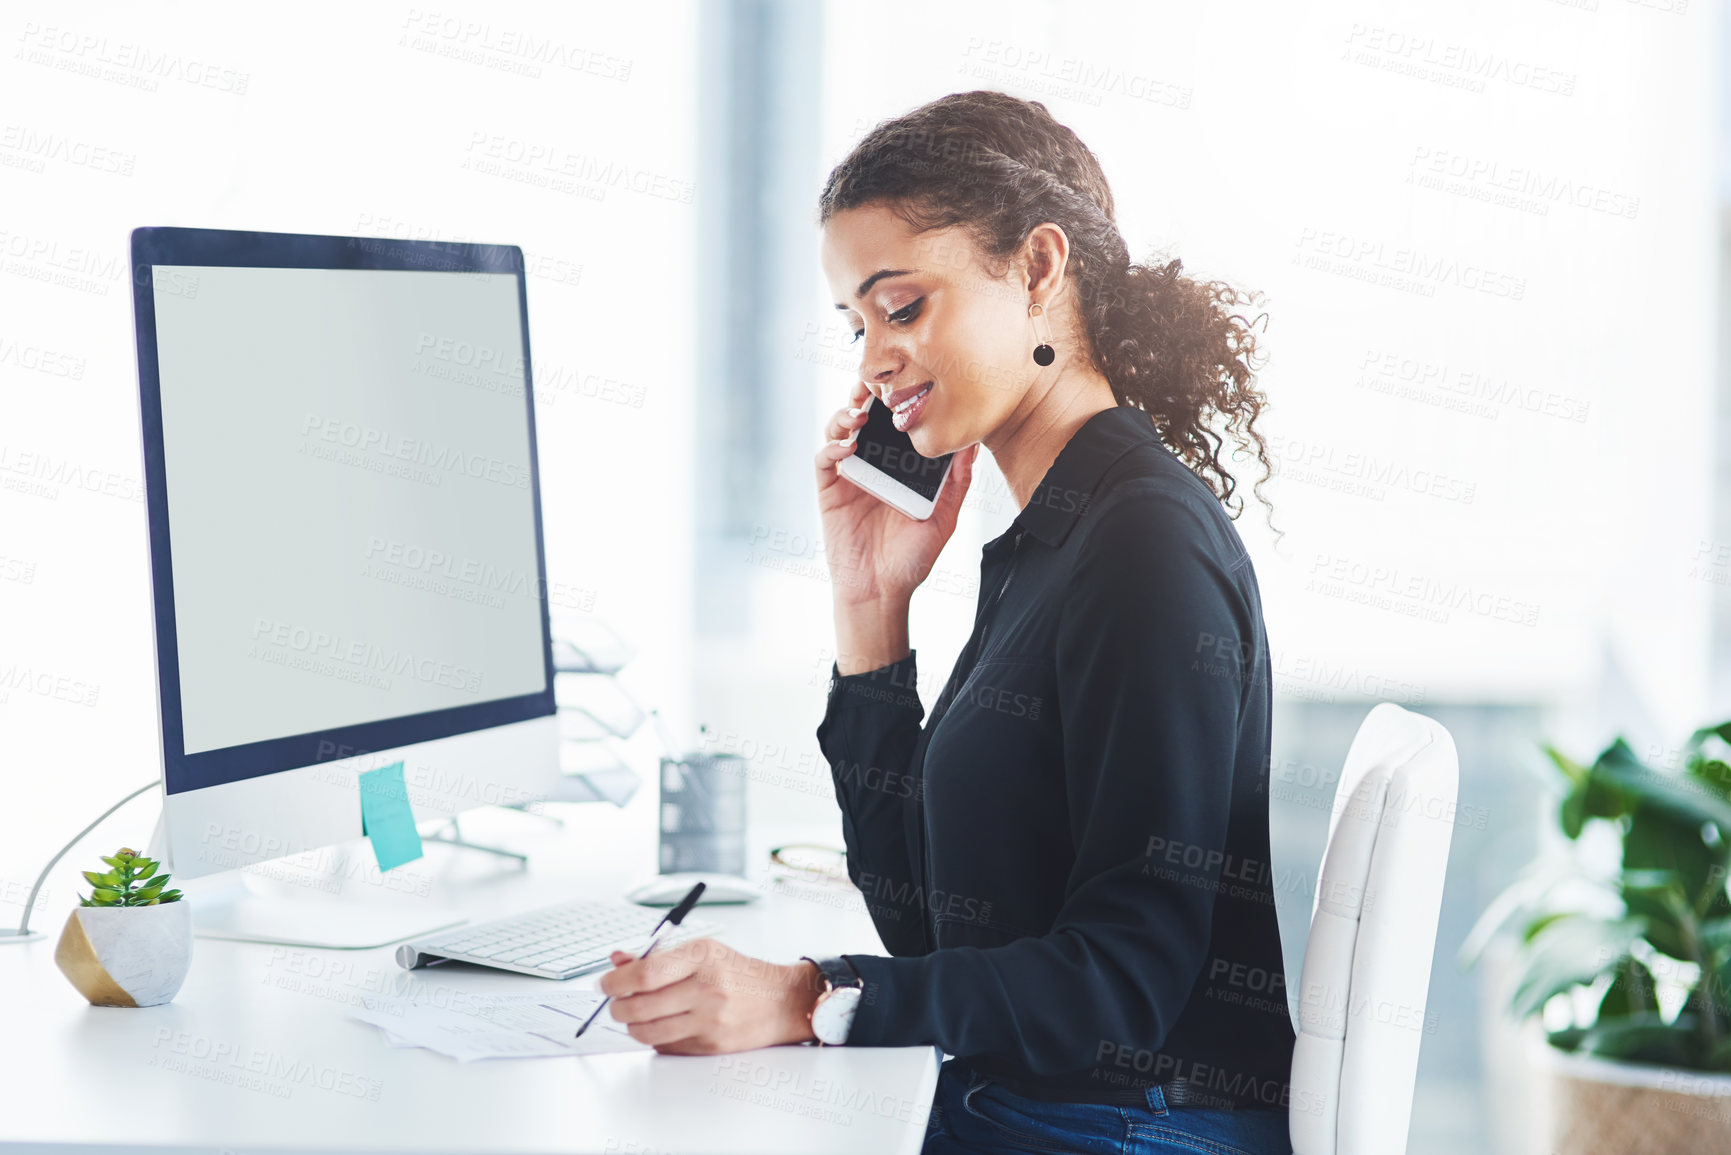 Buy stock photo Shot of a young businesswoman talking on a cellphone while working in an office